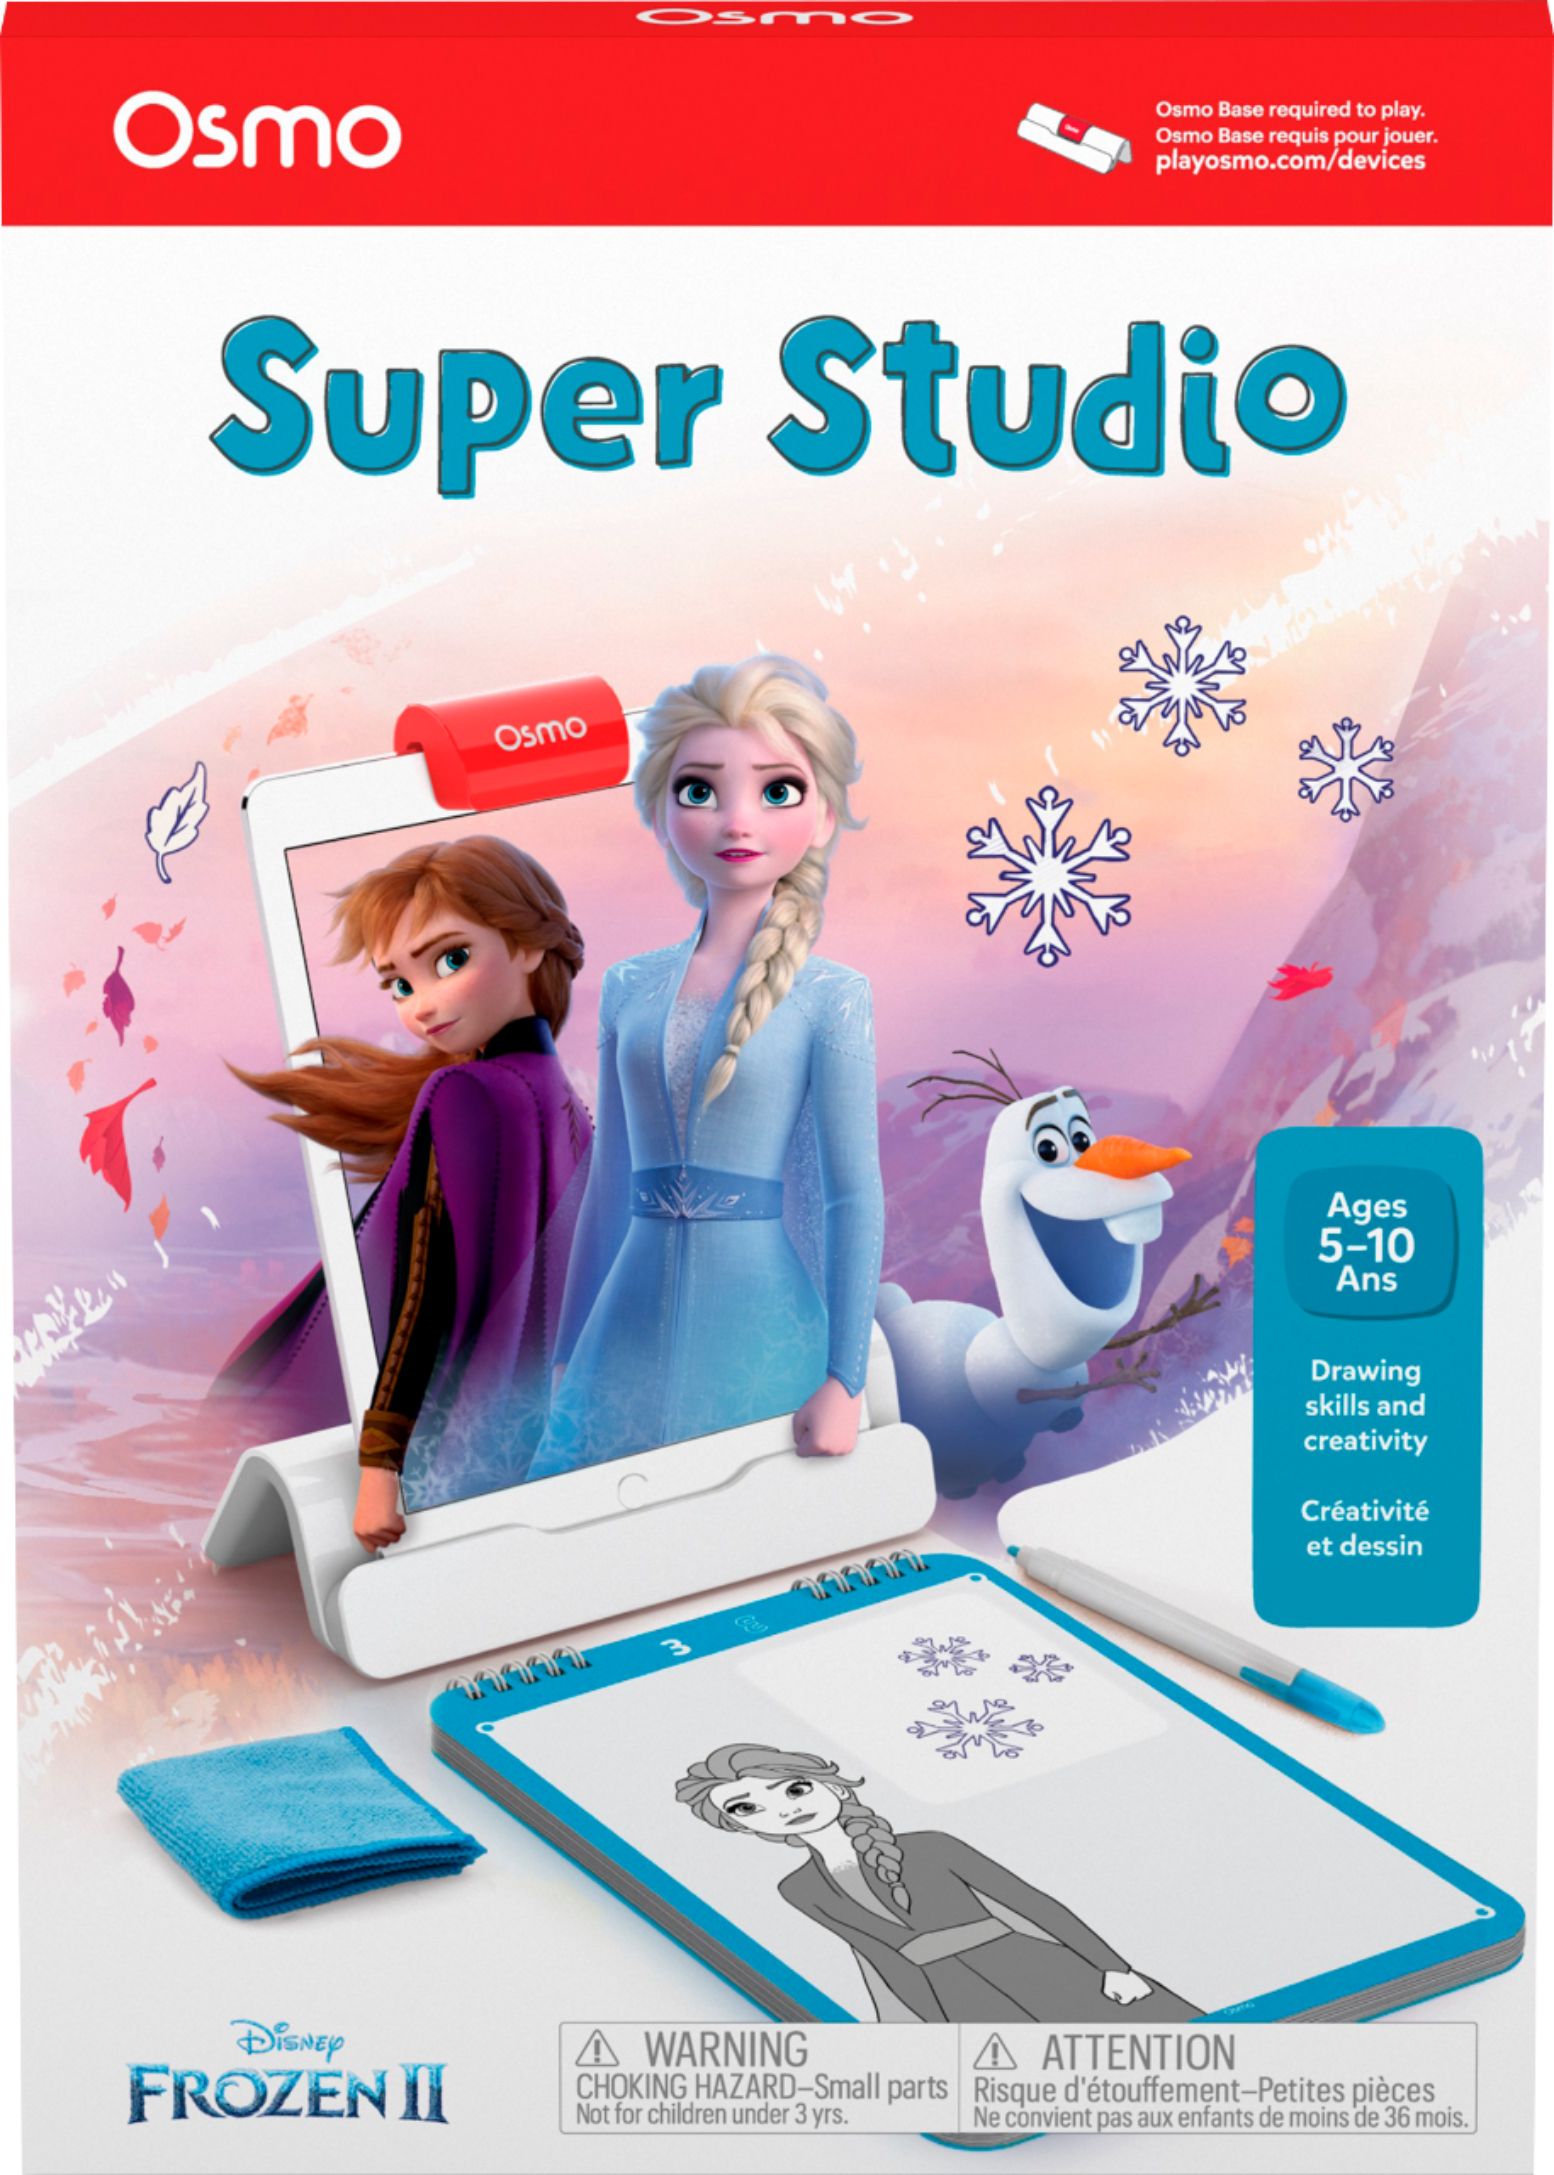 Osmo Super Studio Incredibles 2 Learn to Draw Disney Game for iPad & Fire Tablet 